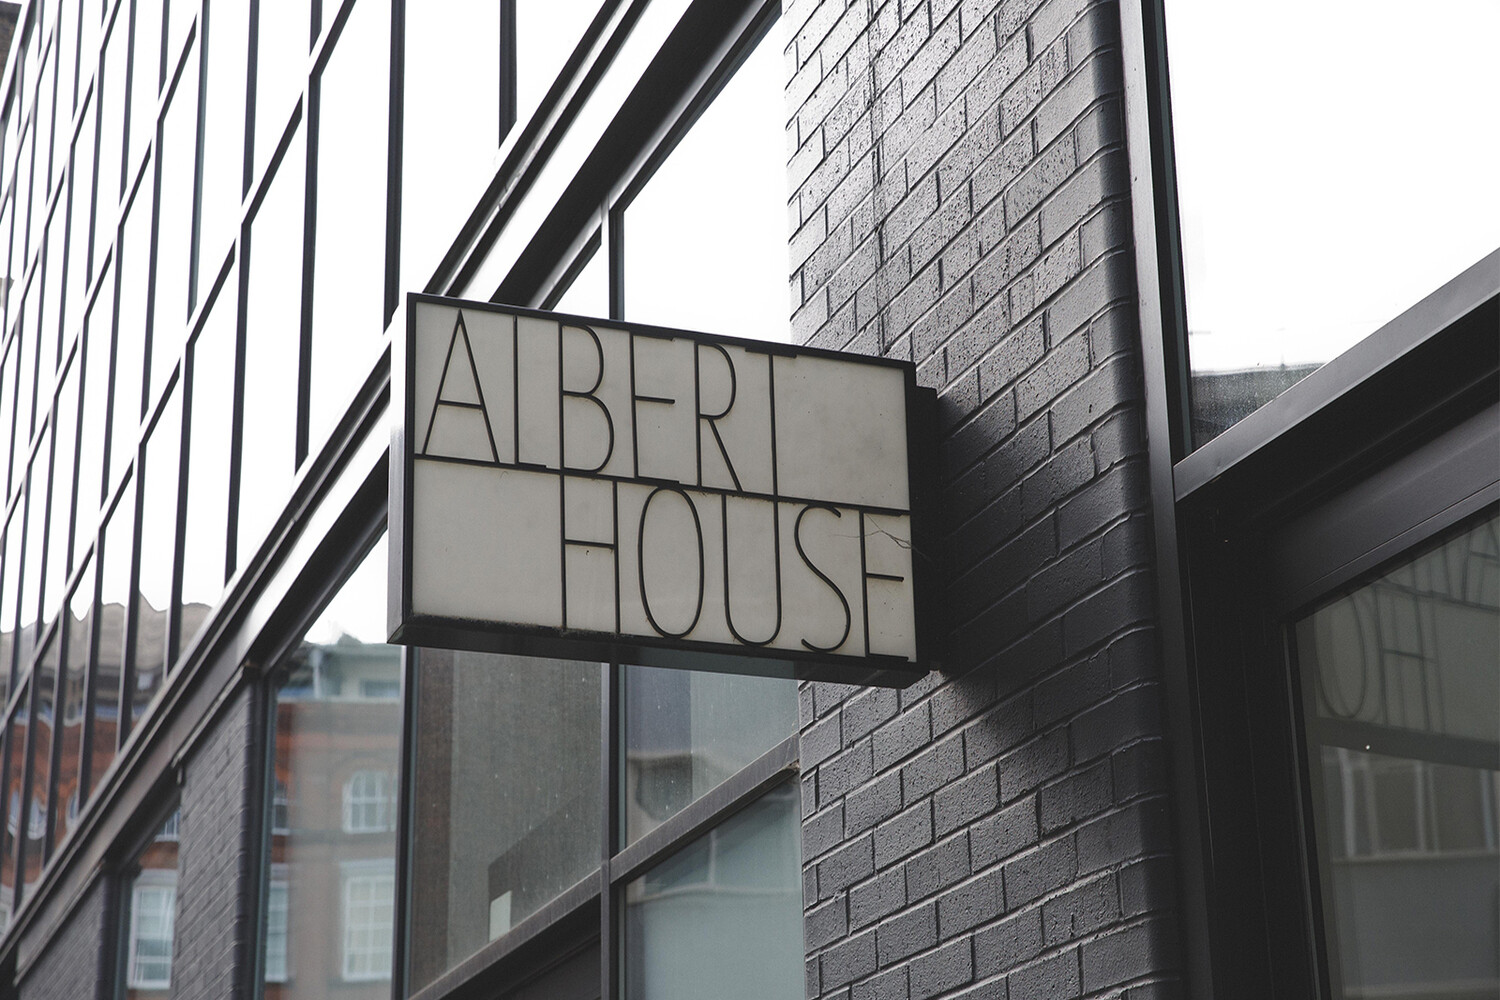 Offices at Albert House